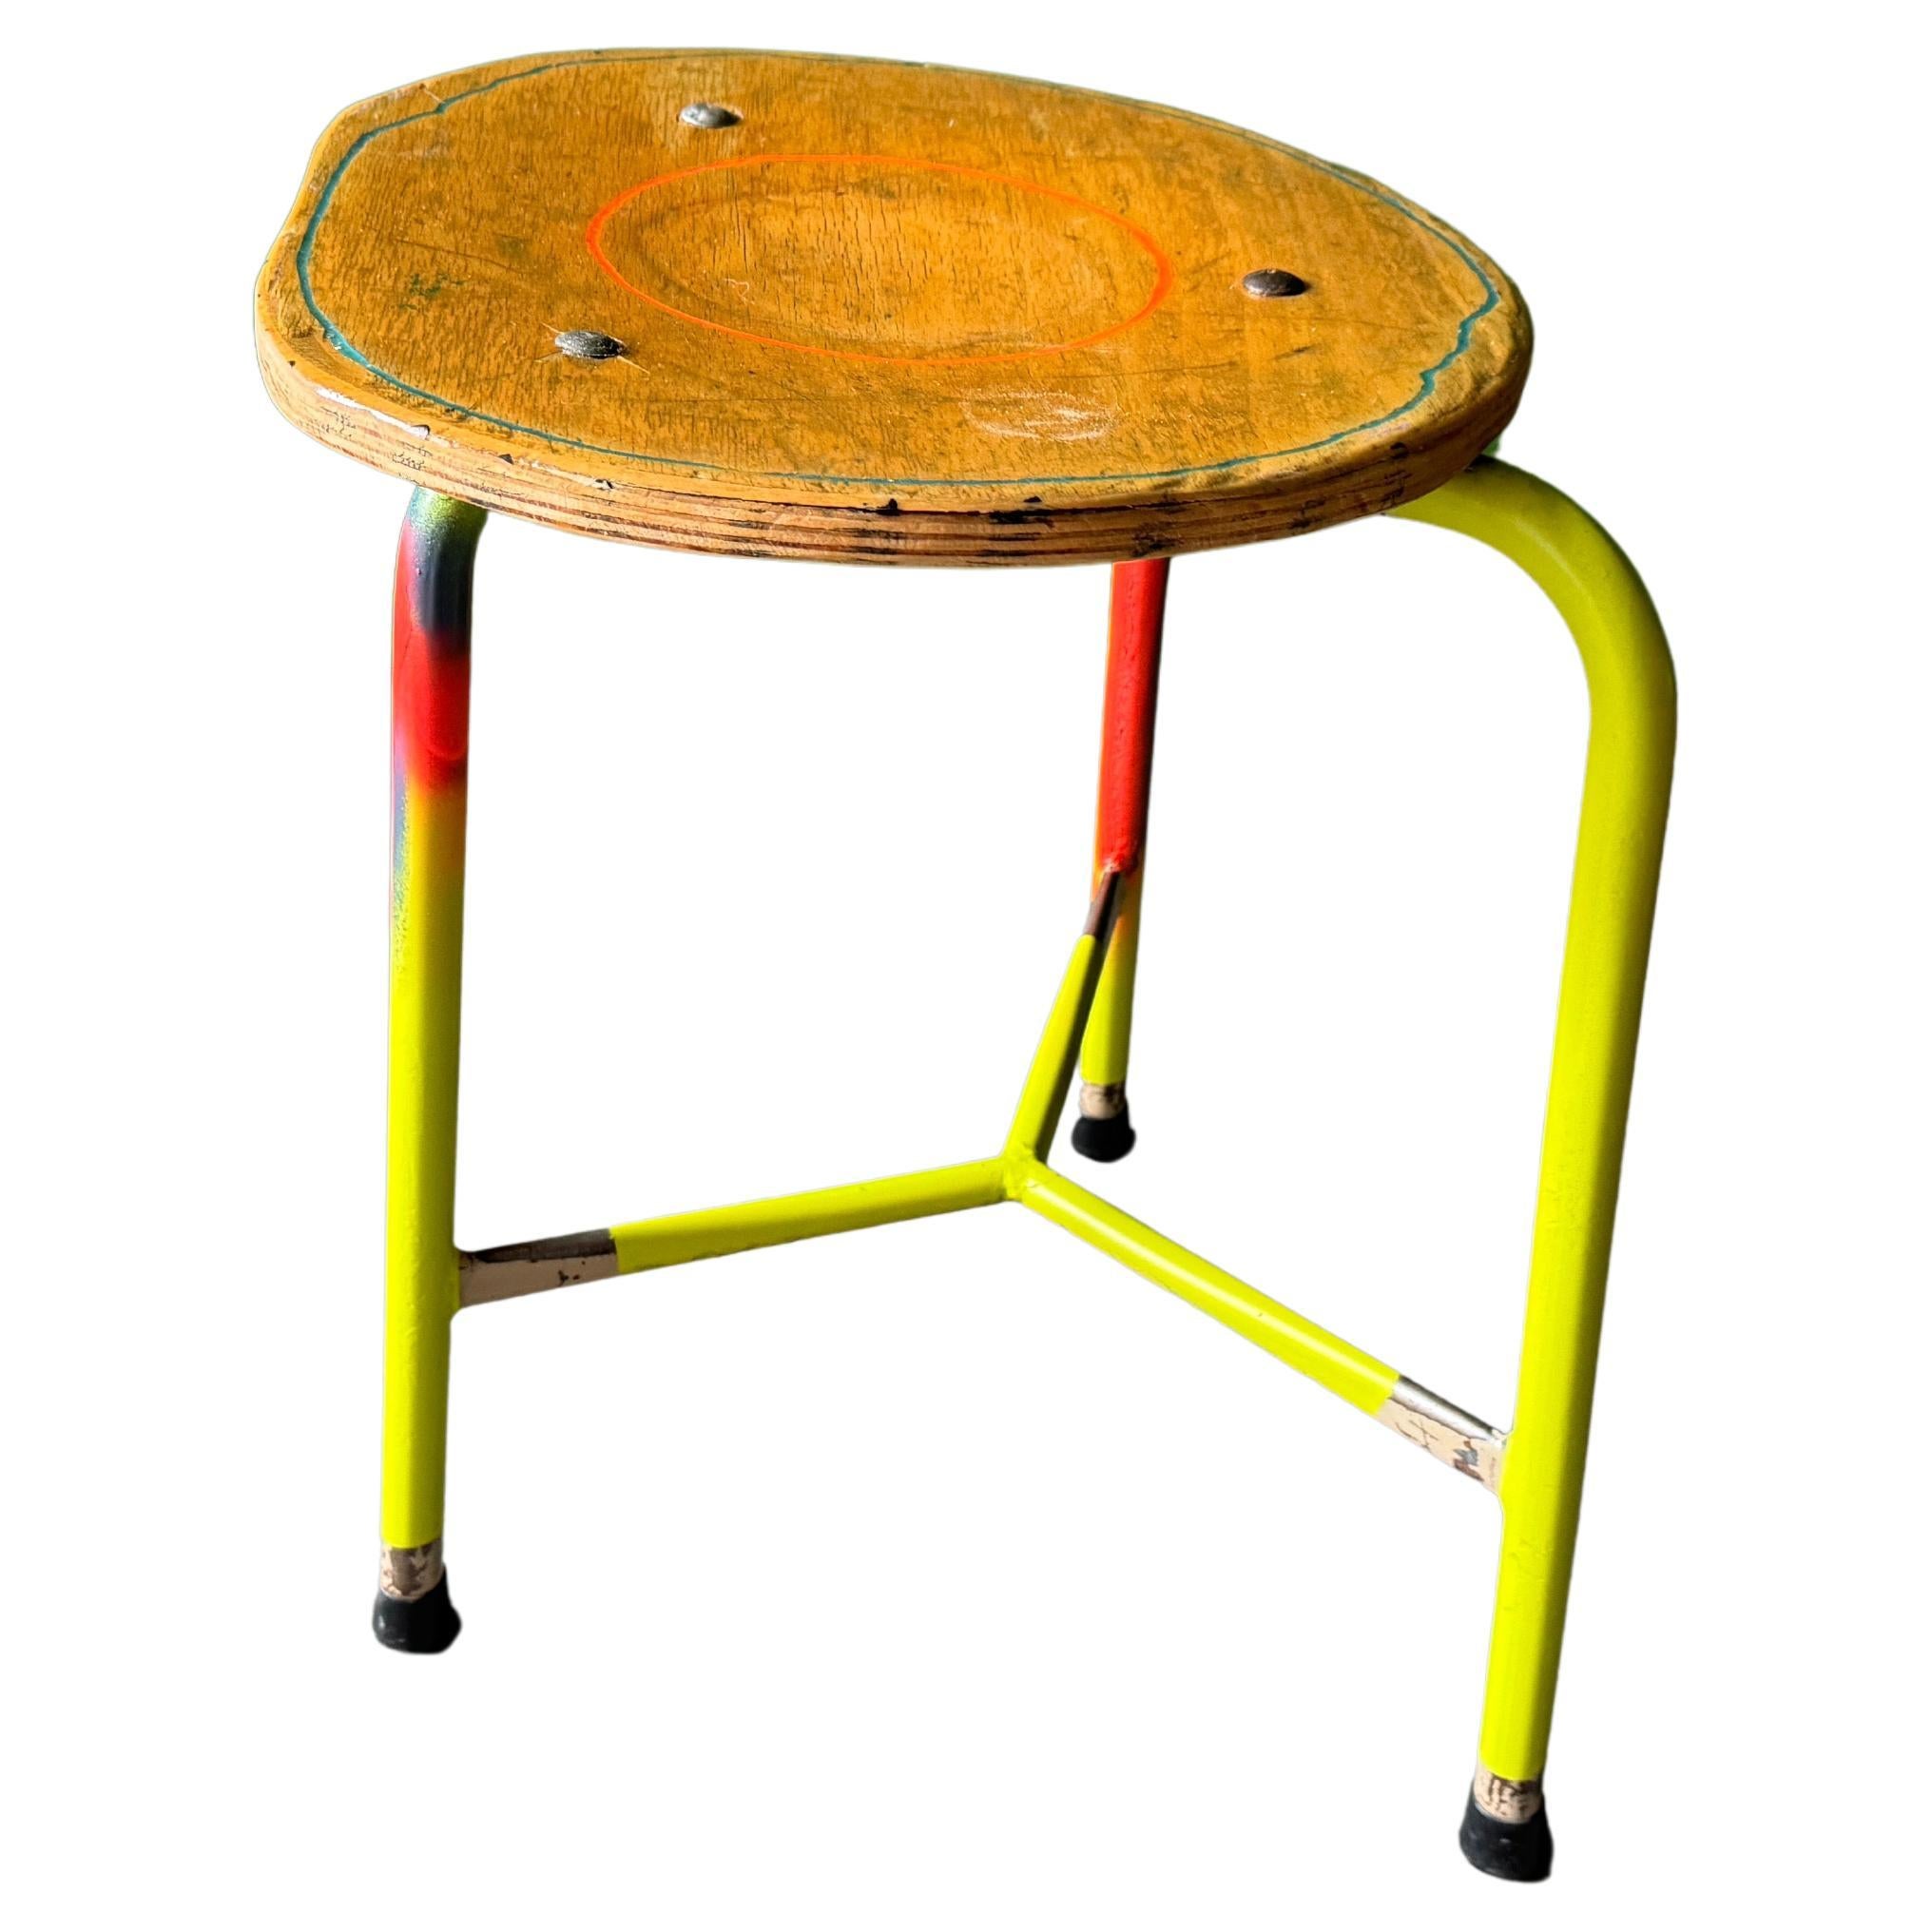 Stool "working class hero" by Markus Friedrich Staab For Sale